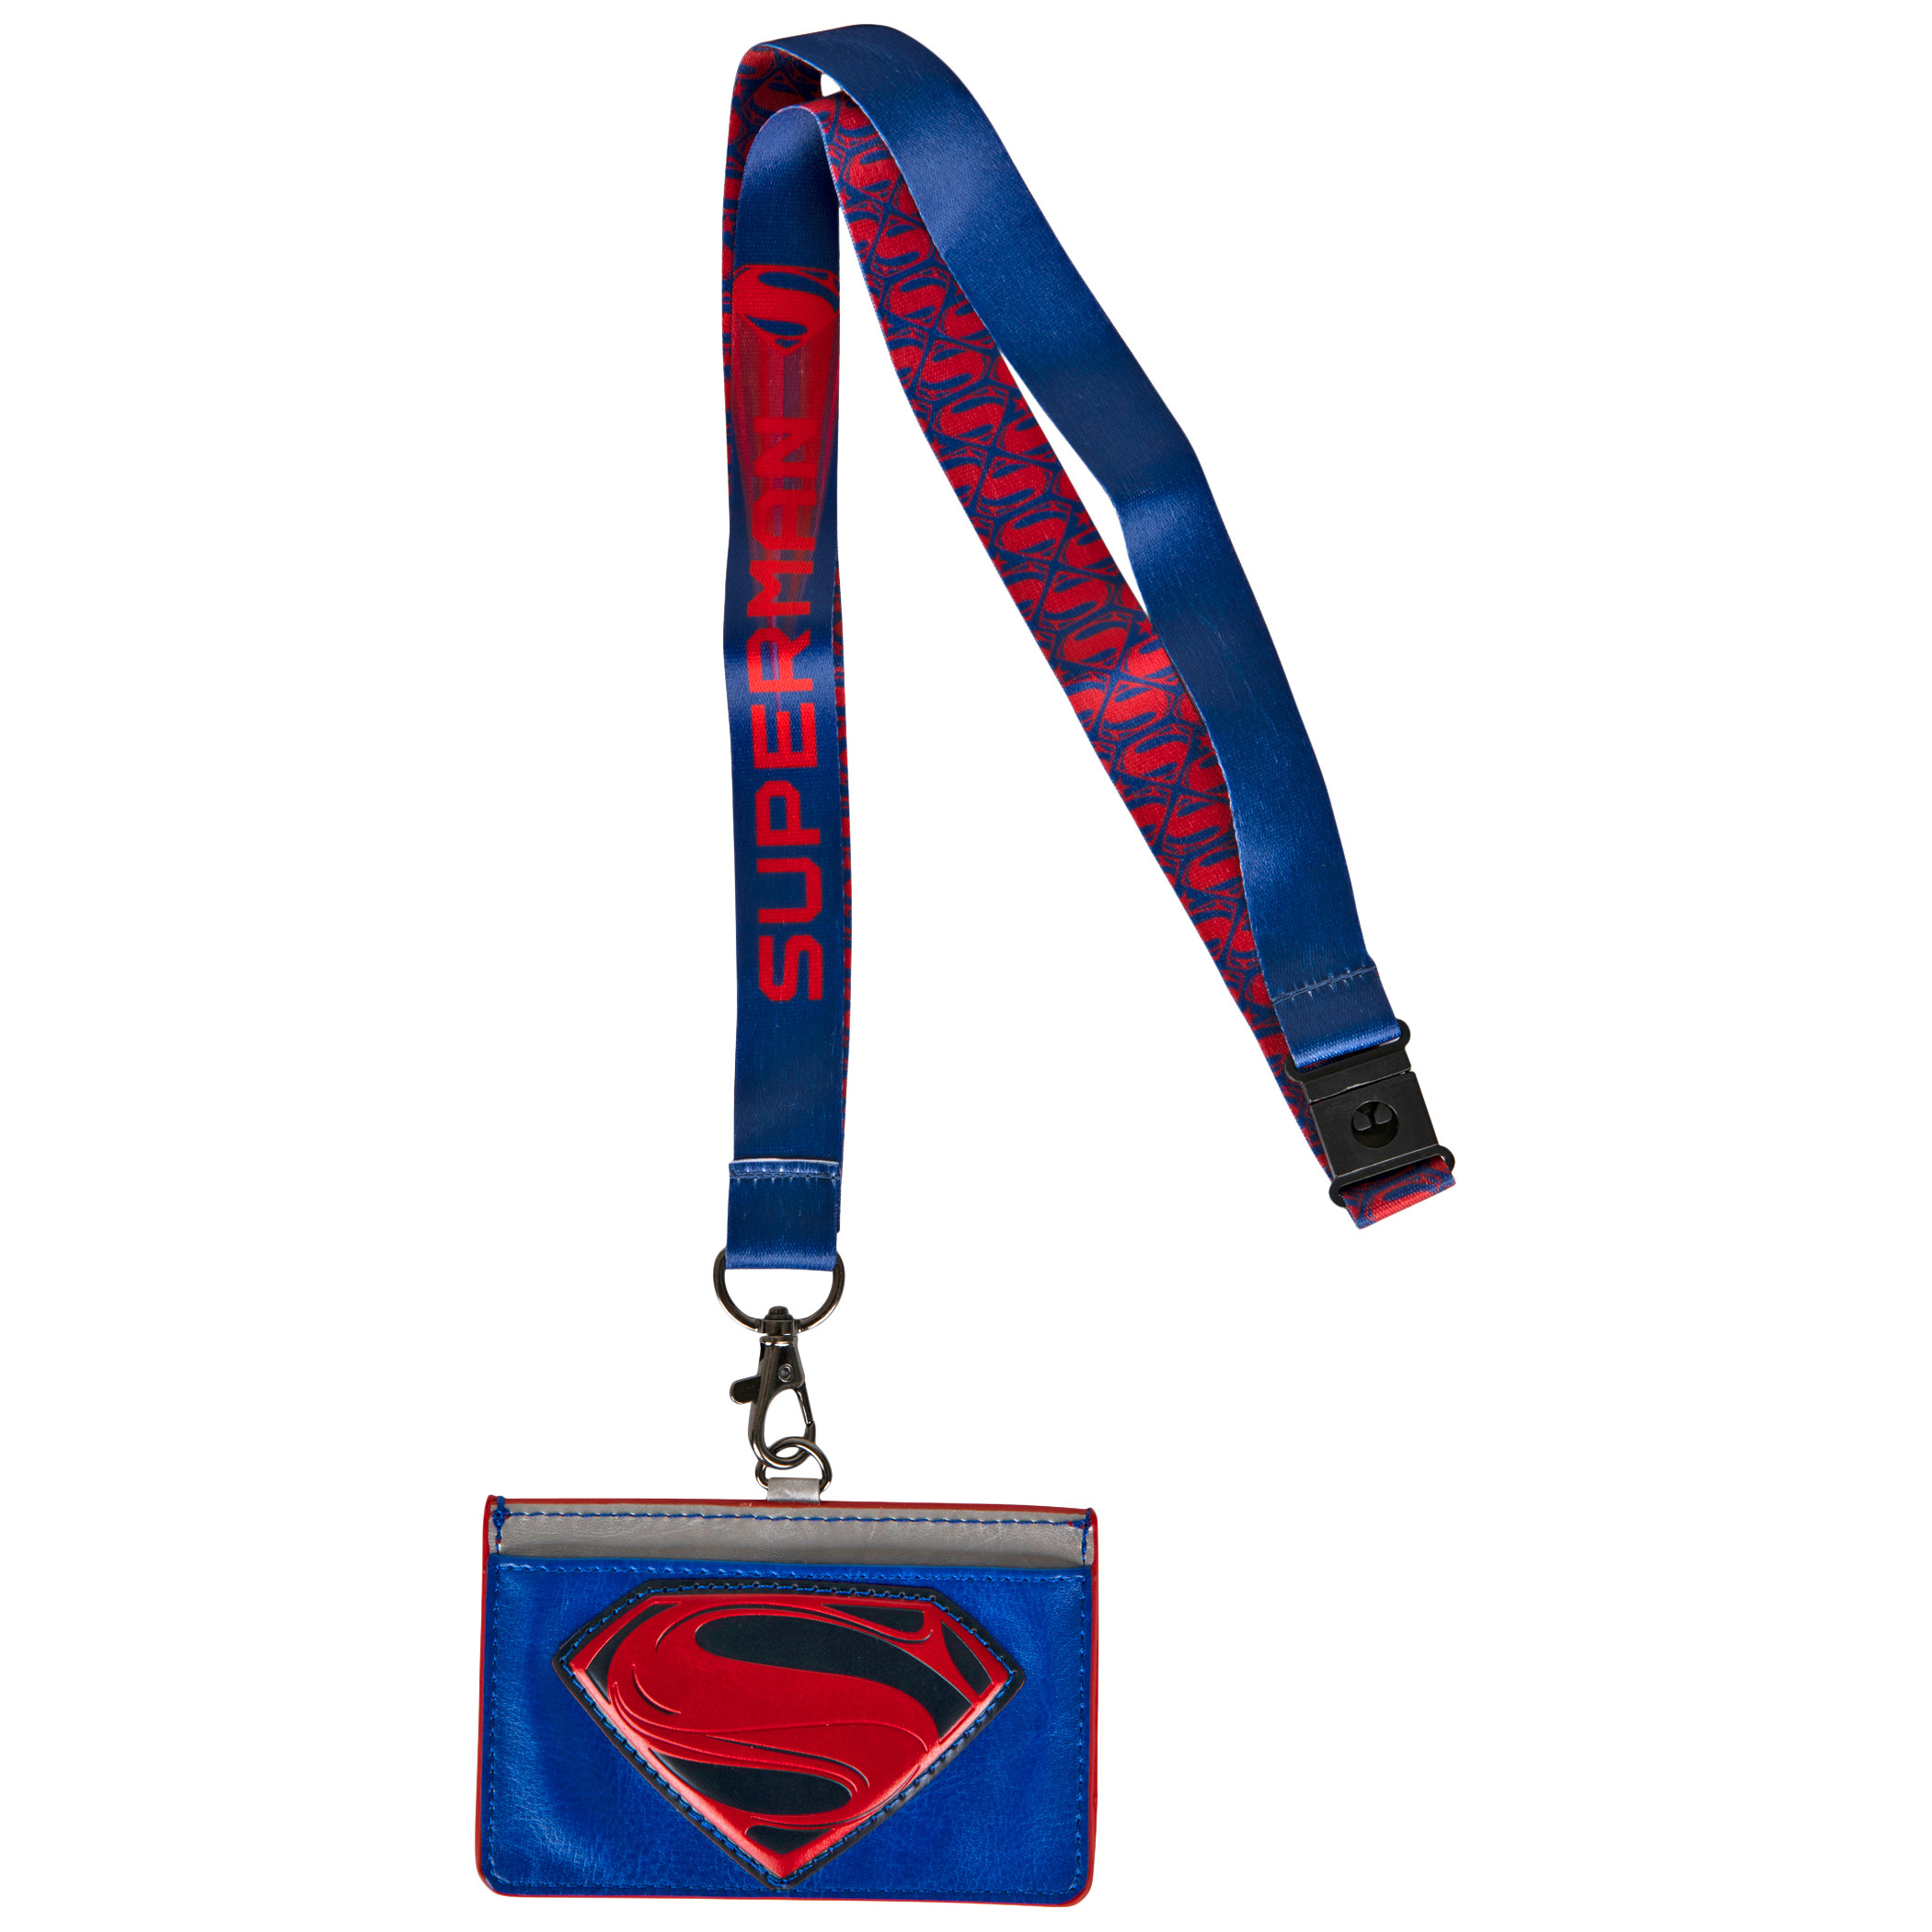 Superman DC Comics Lanyard Necklace neck strap ID Holder Keychain Licensed NWT 